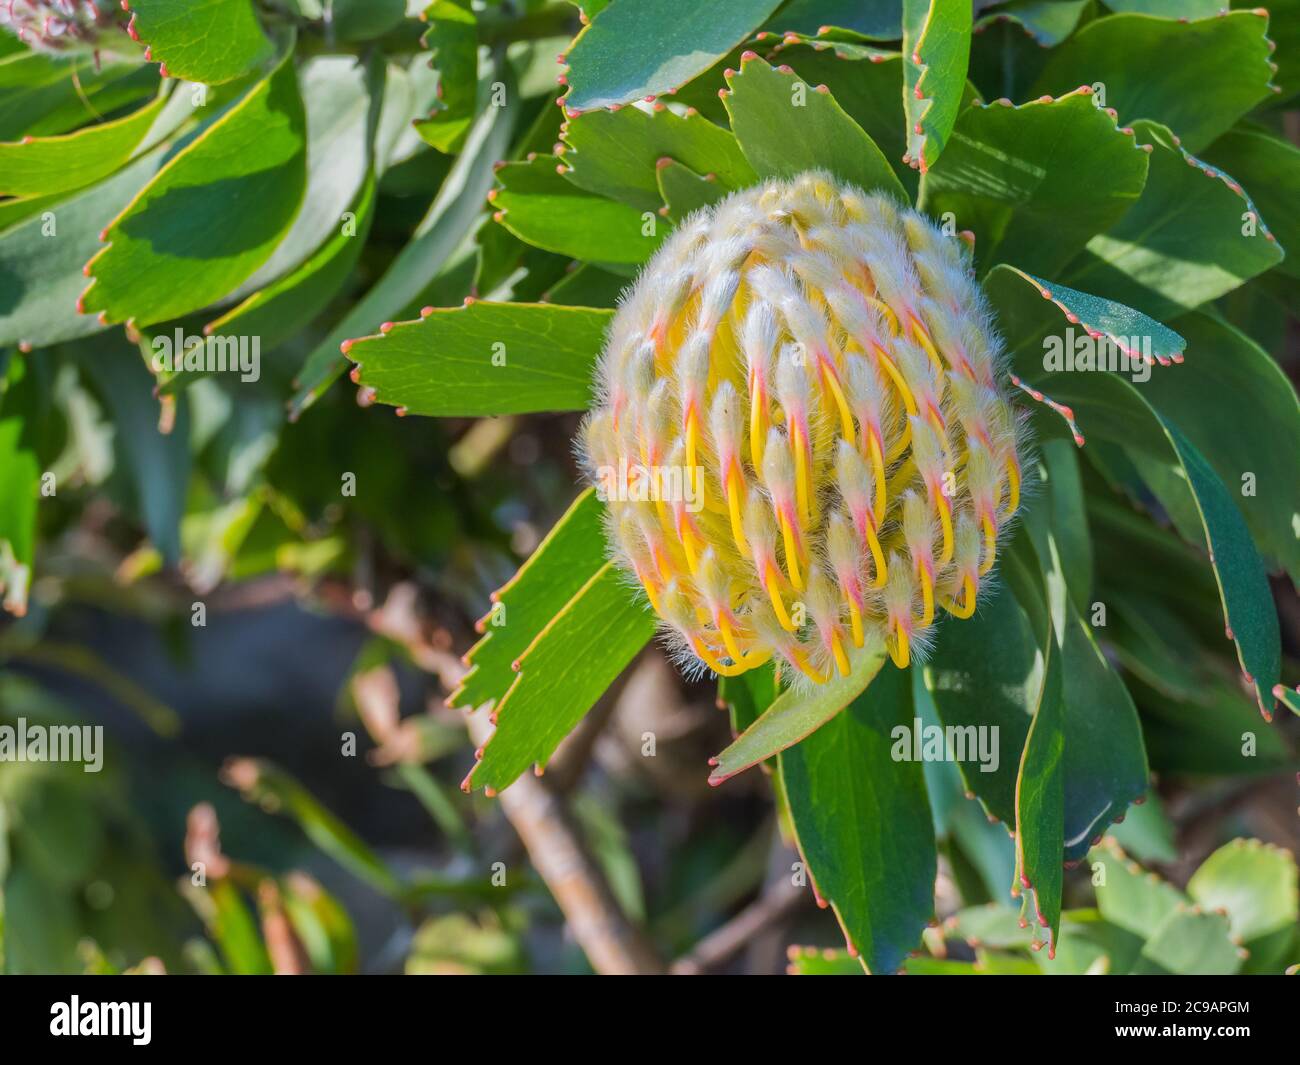 protea plant bub close up view with natural sunlight Stock Photo